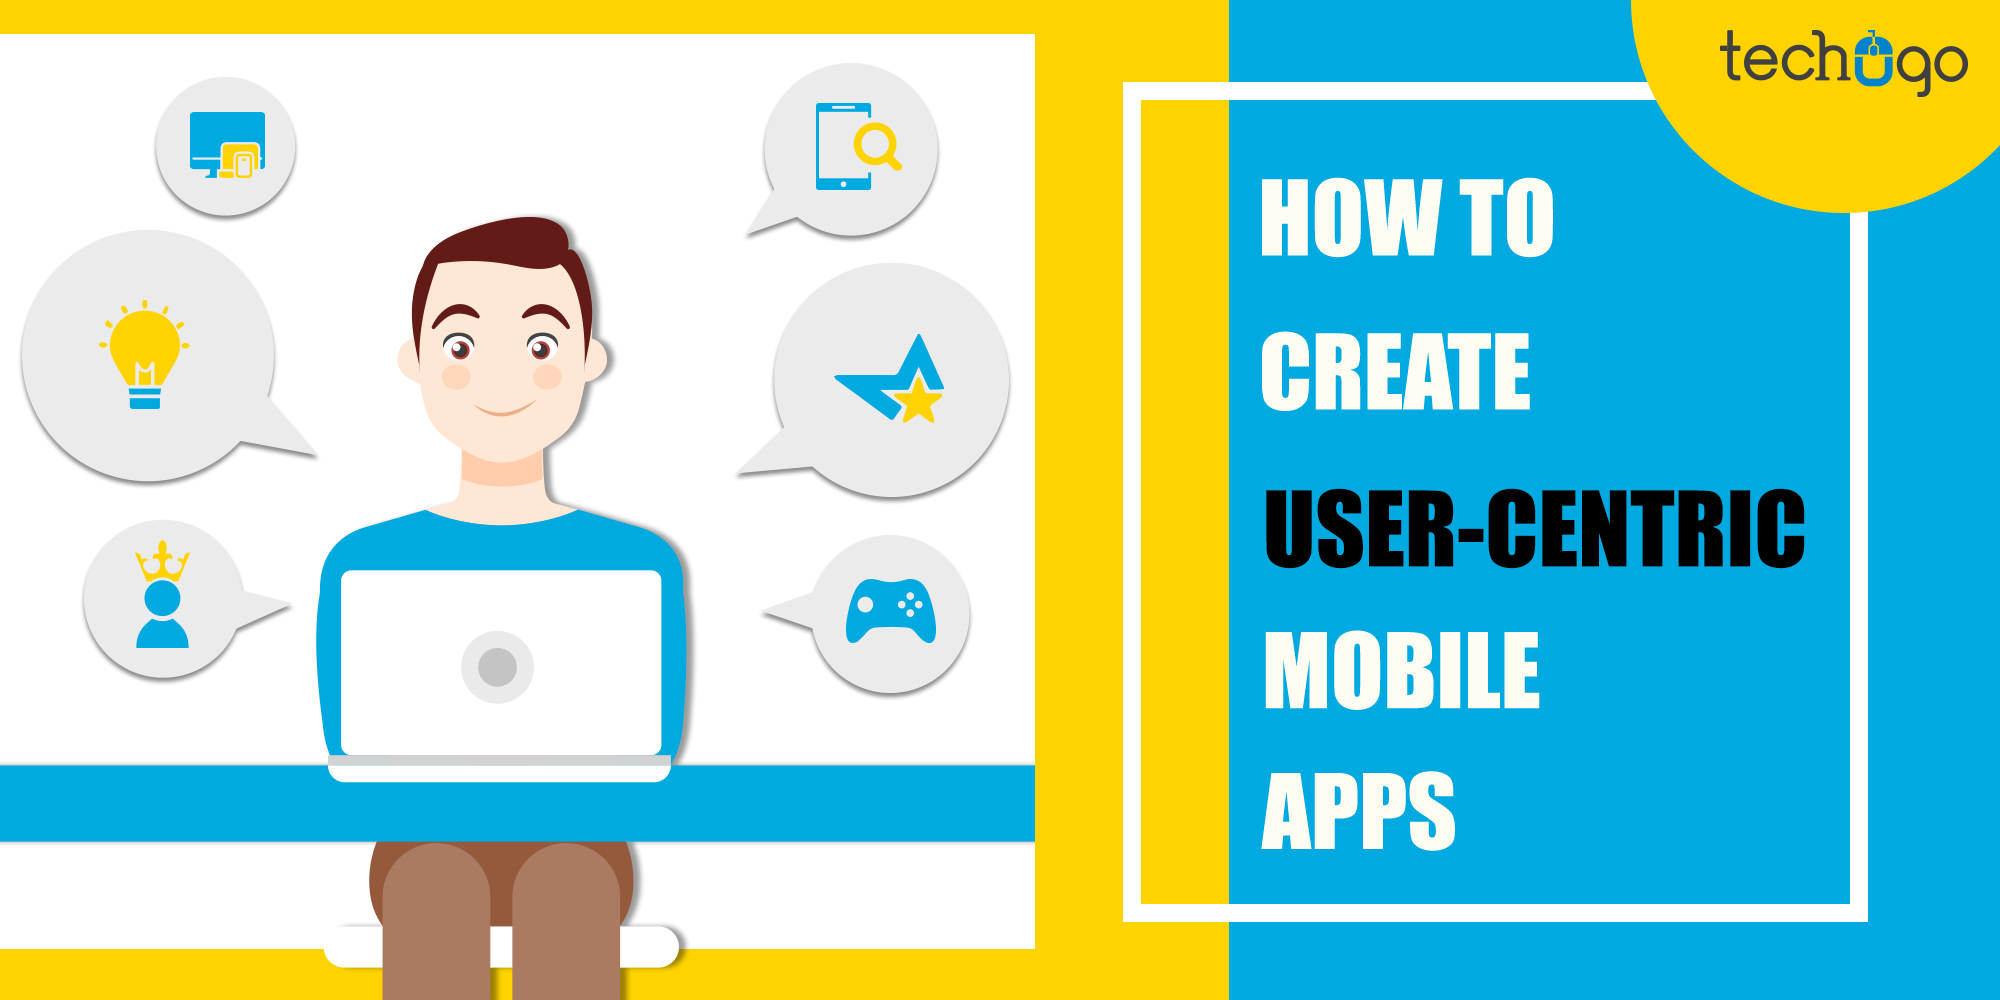 How To Create User-Centric Mobile Apps